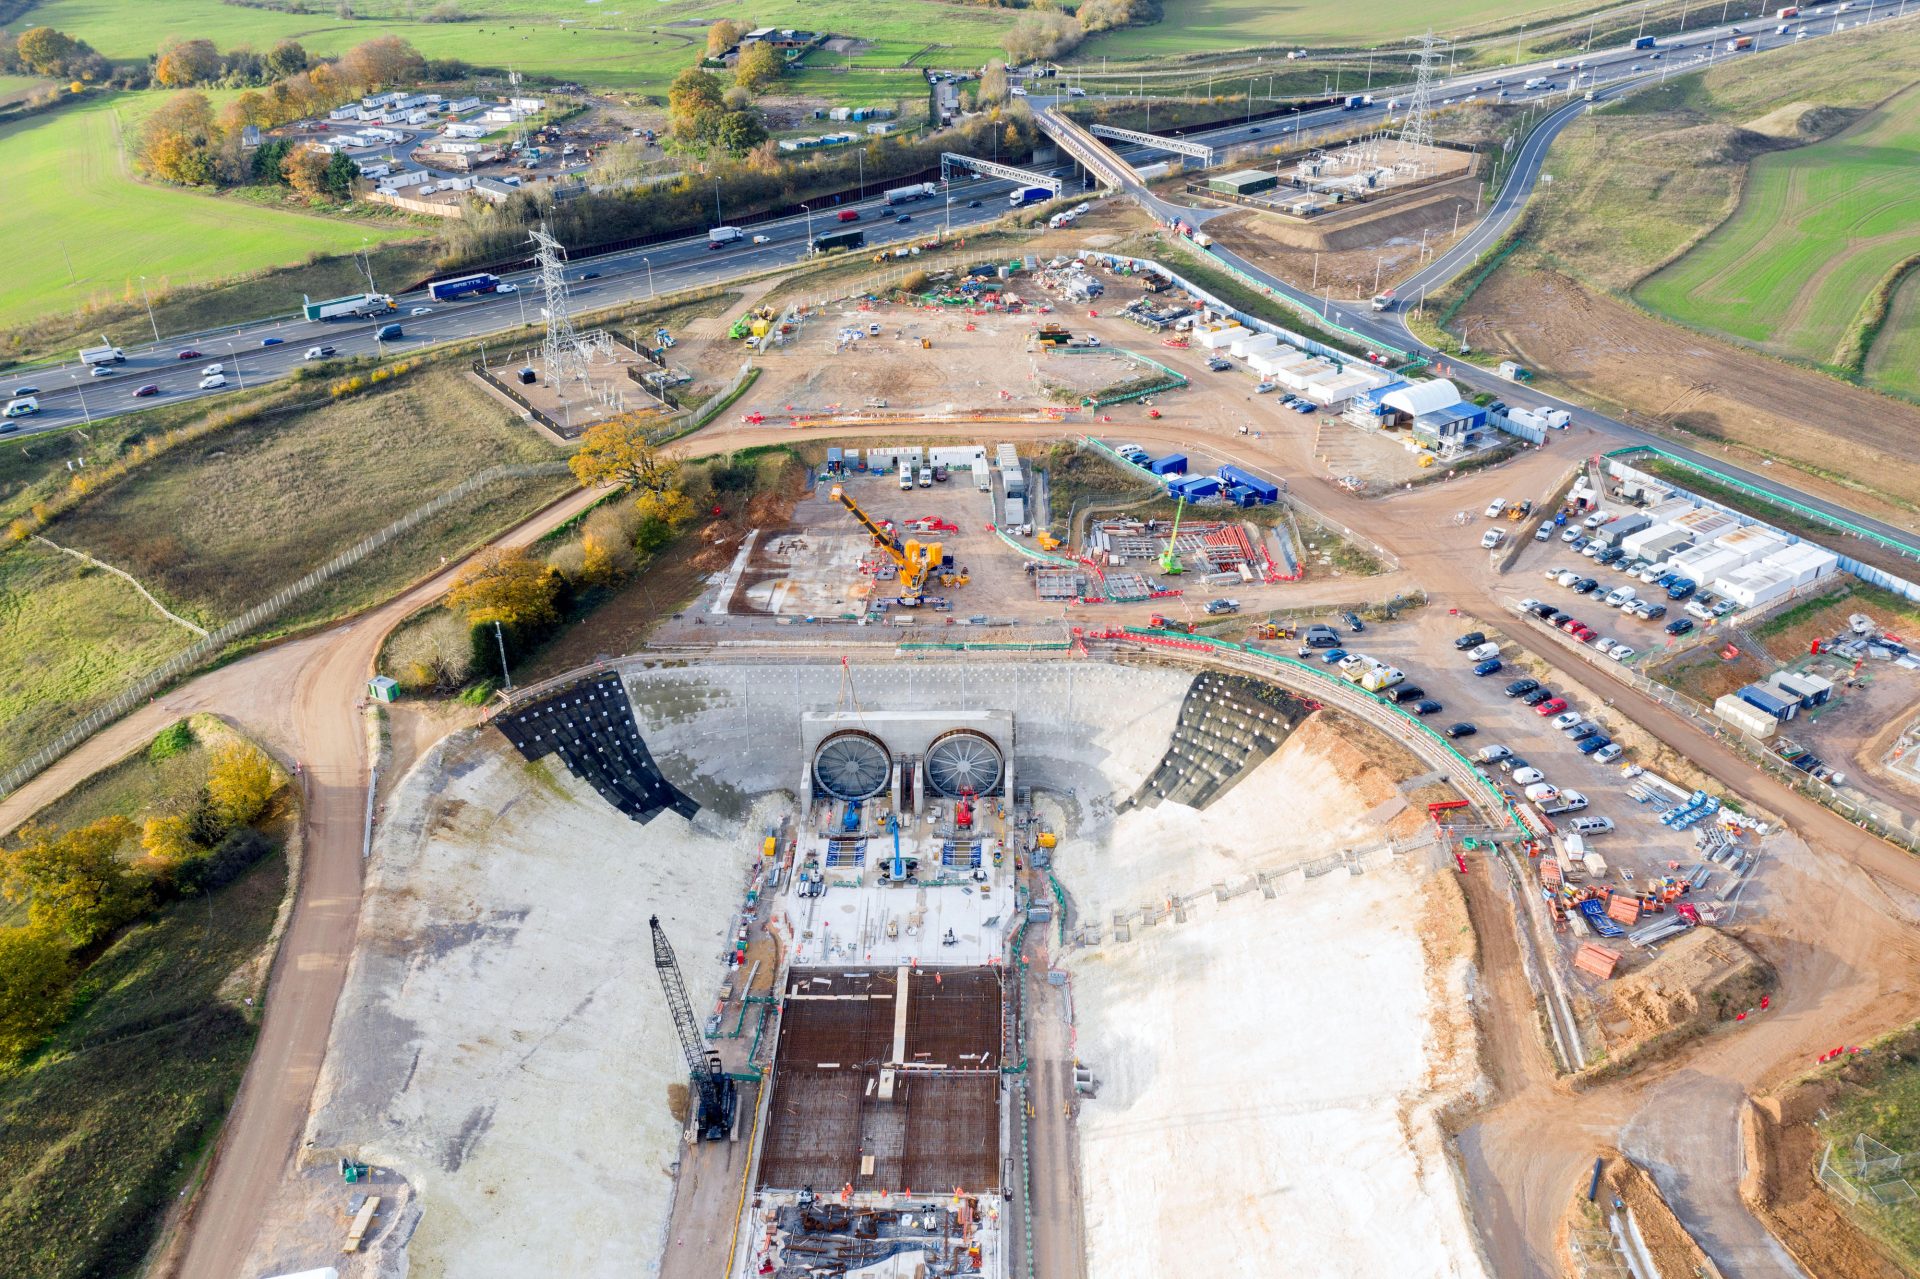 The construction site at the entrance to the HS2 Chiltern tunnel beside the M25 at Denham, Buckinghamshire. -Photo: Chris Gorman/Getty Images